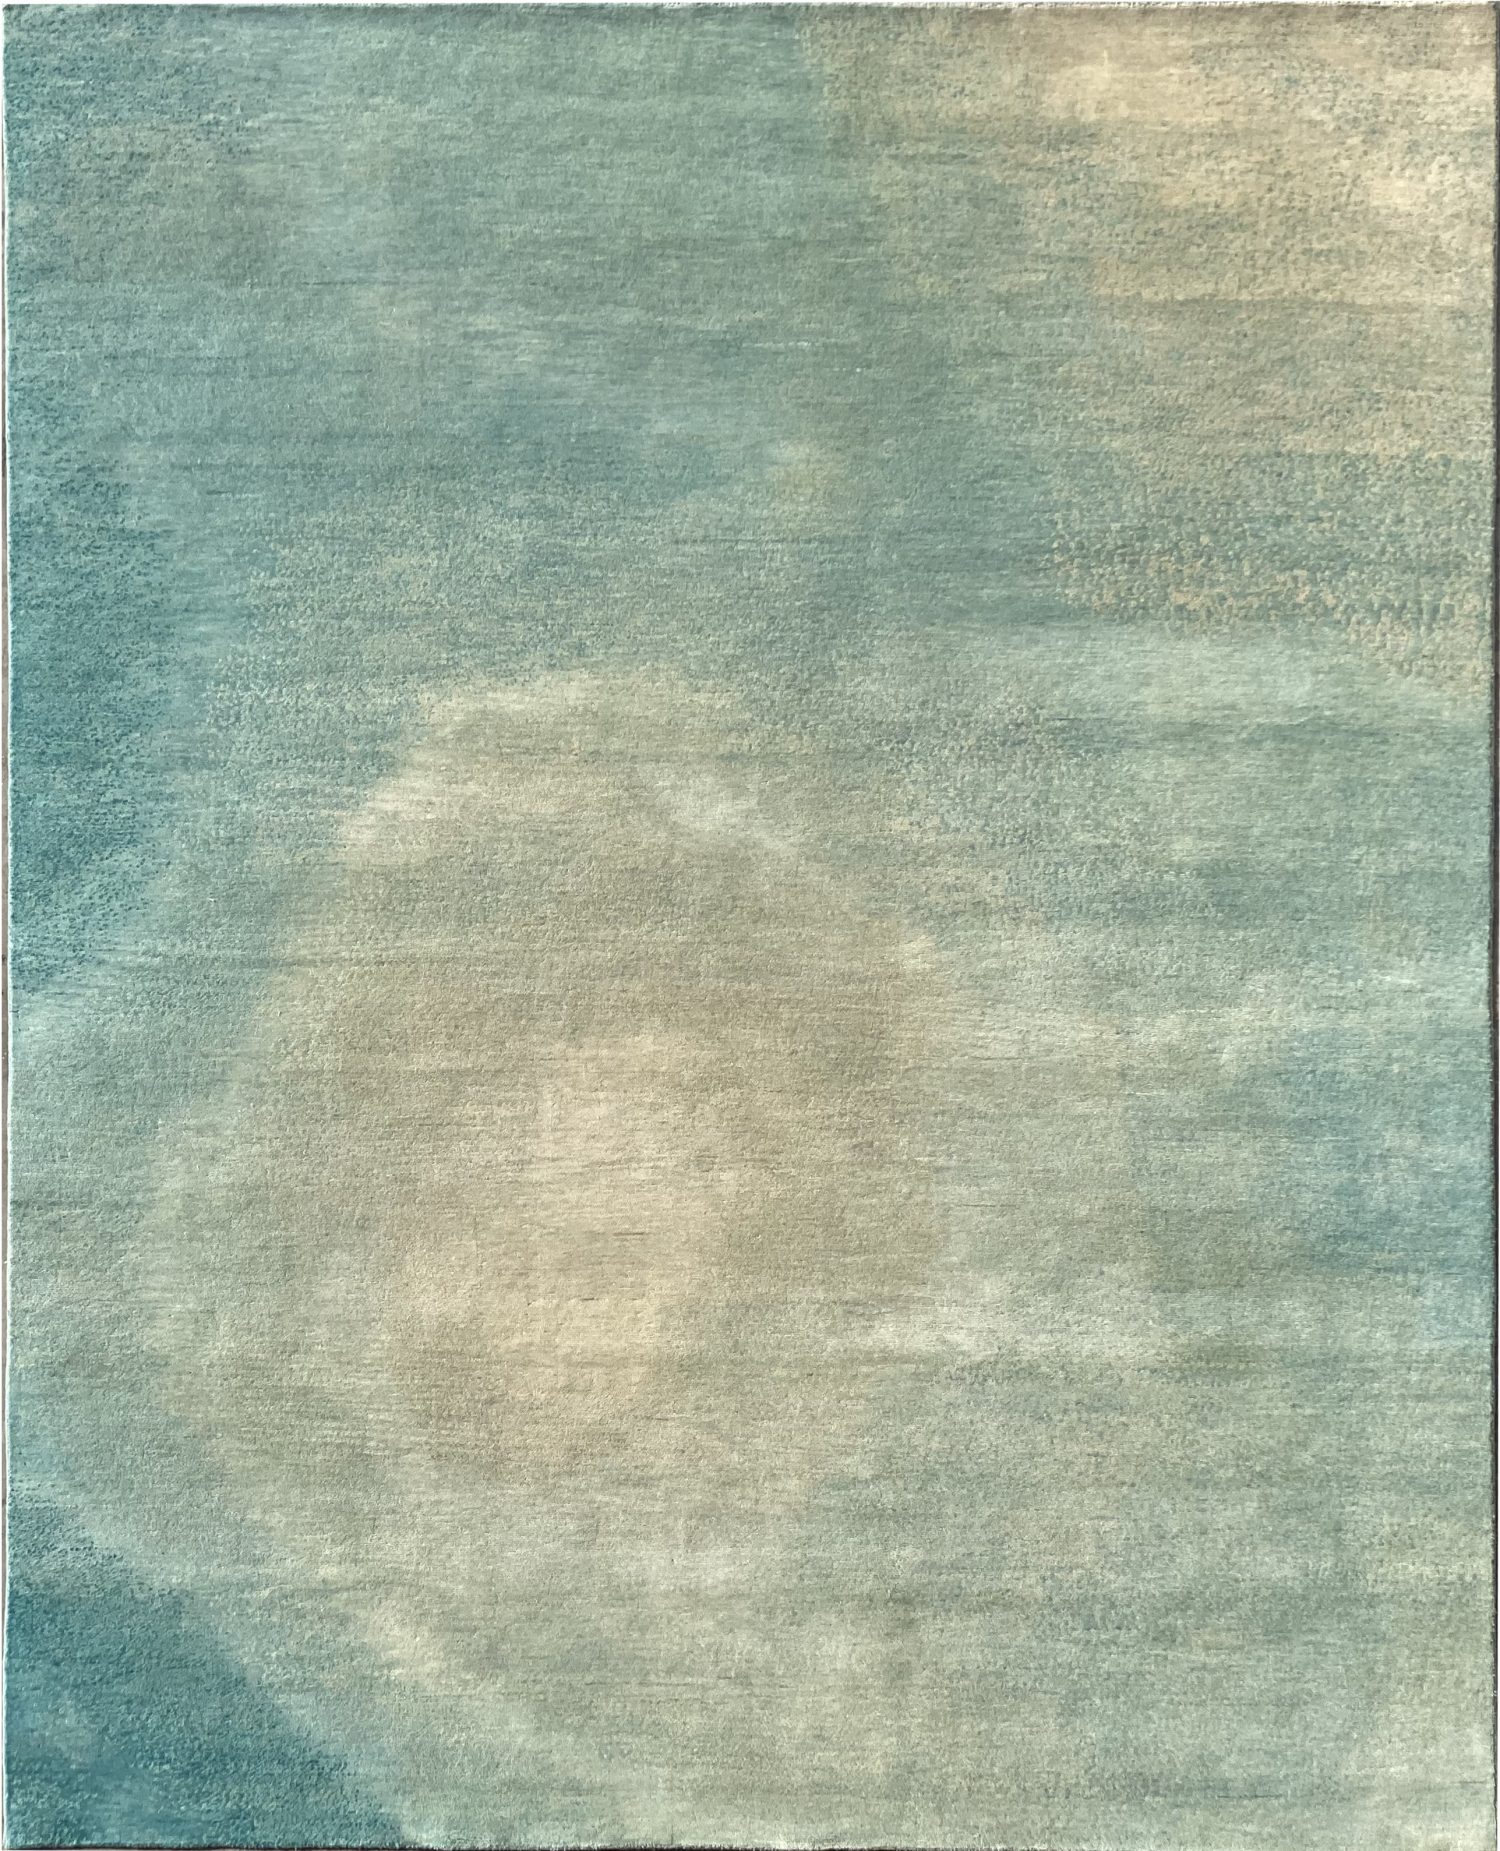 Mimosa is a contemporary Tibetan rug that is made up of blended wool.